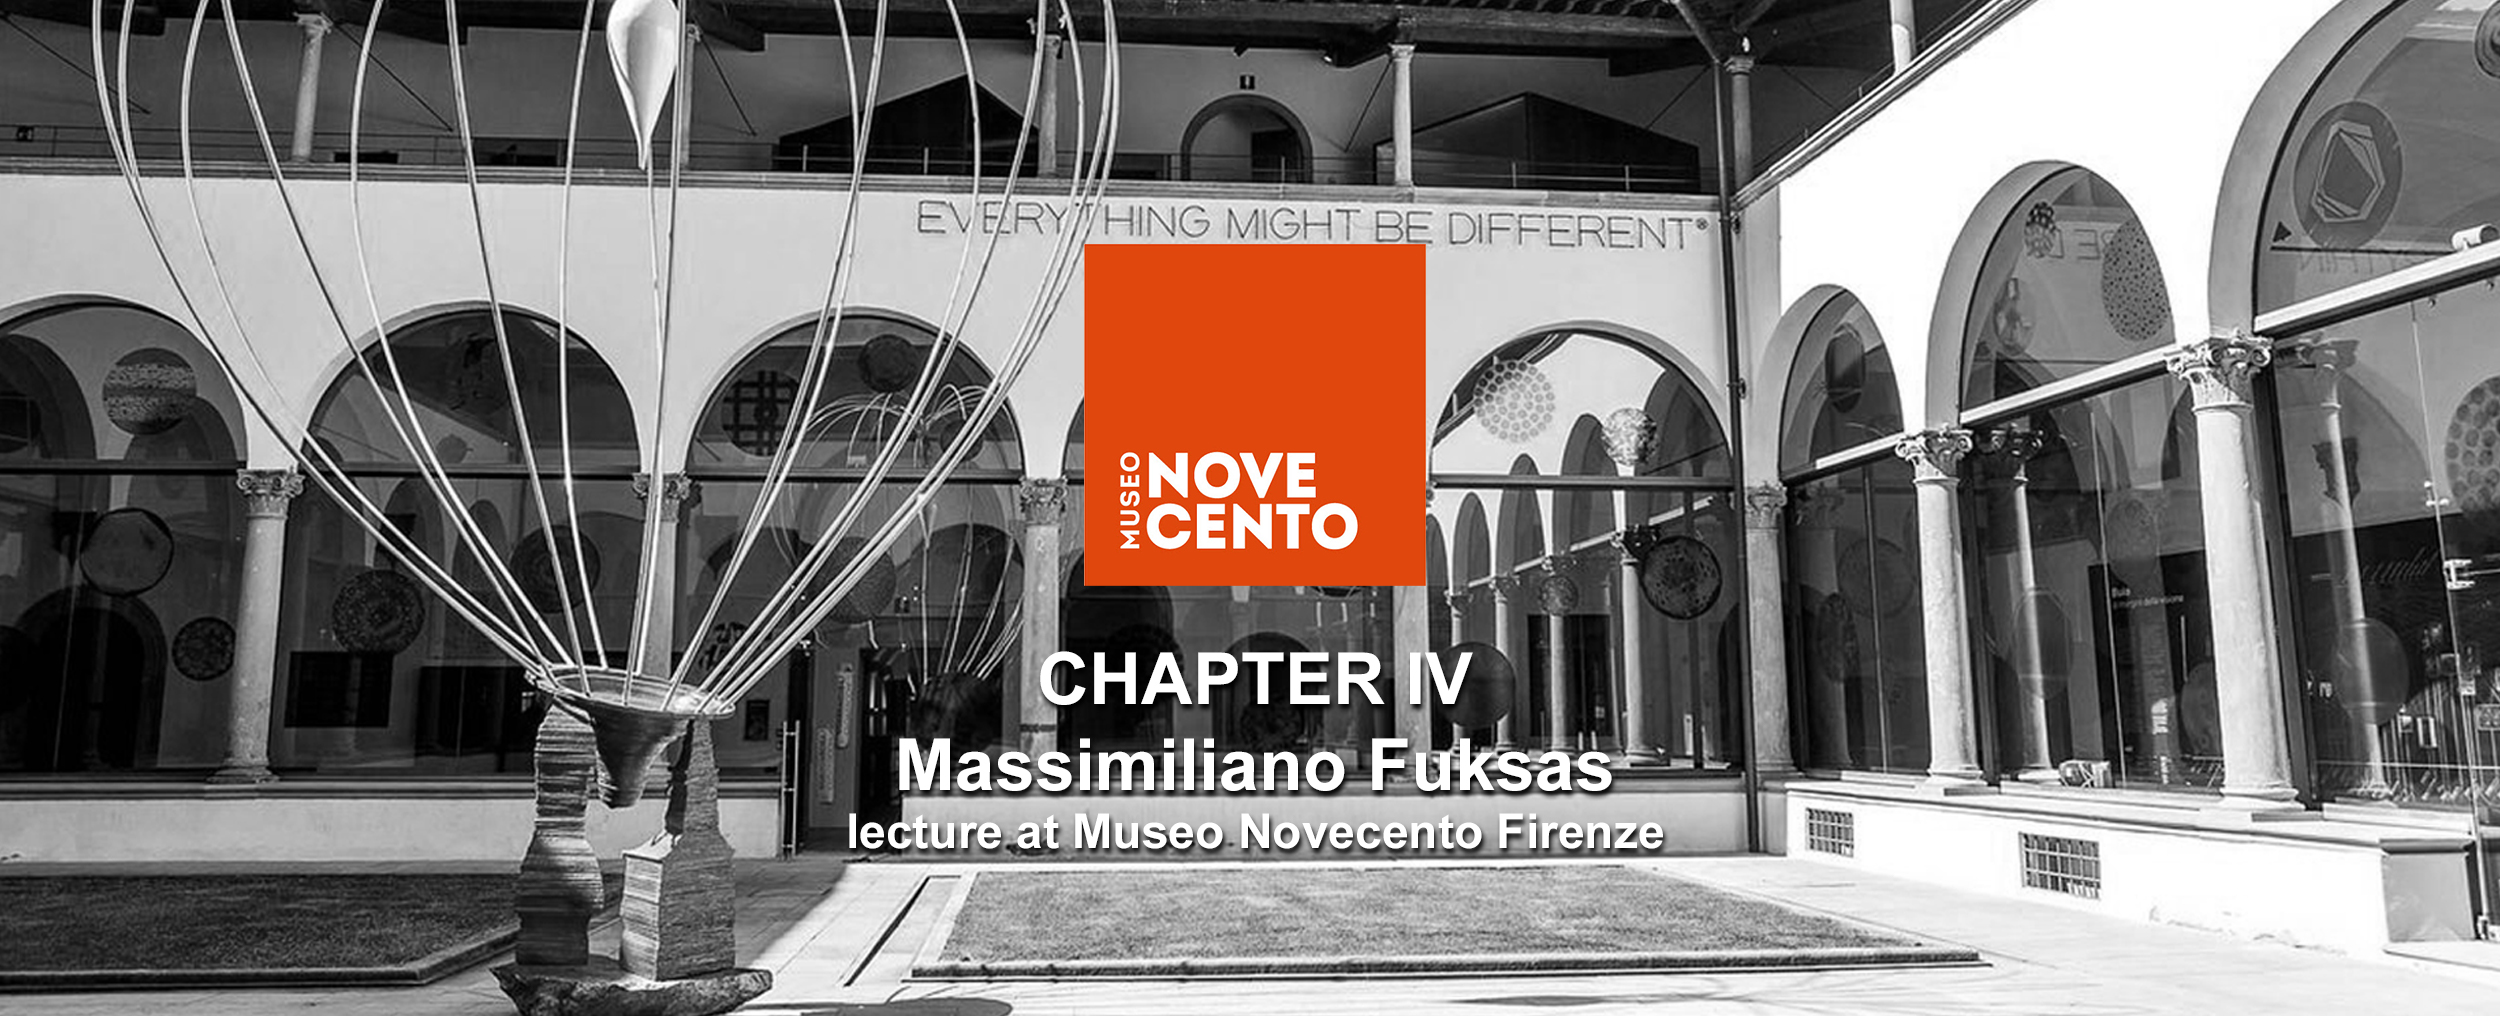 Futura. What will happen to us, to others, to the planet – Chapter IV. Massimiliano Fuksas’ lecture at Museo Novecento Firenze 2021, June 17